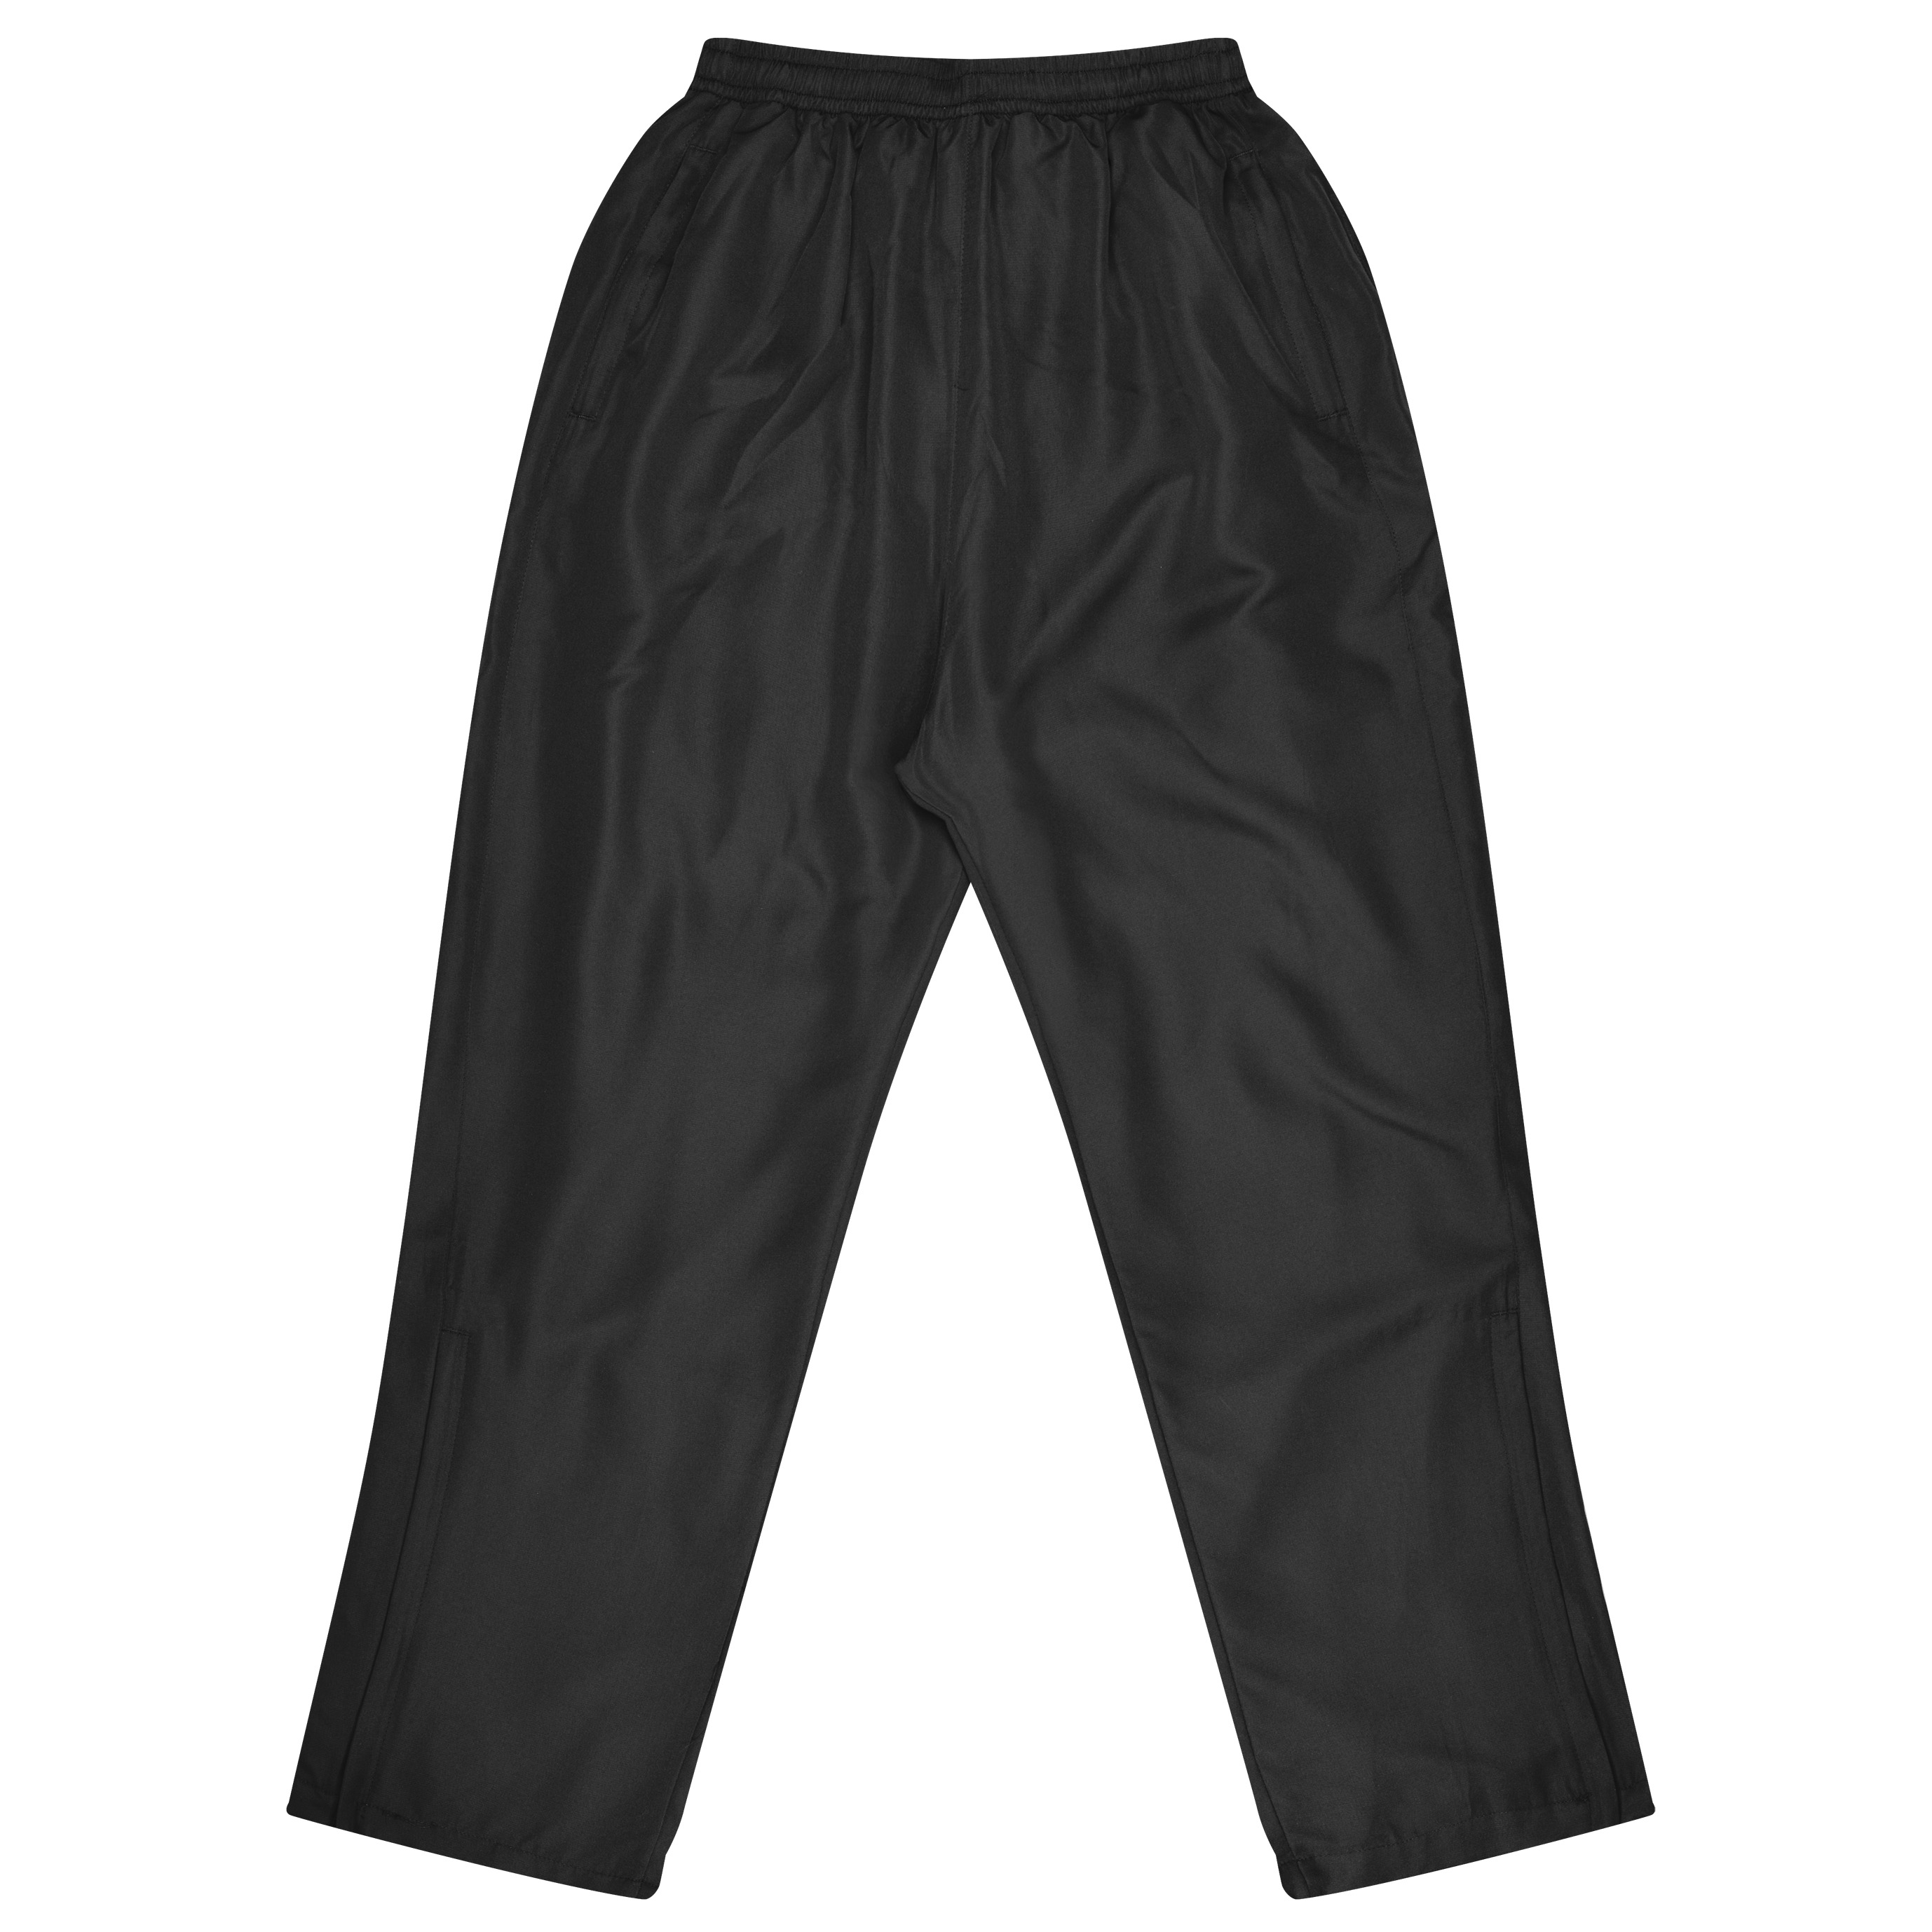 Aussie Pacific Sports Trackpant